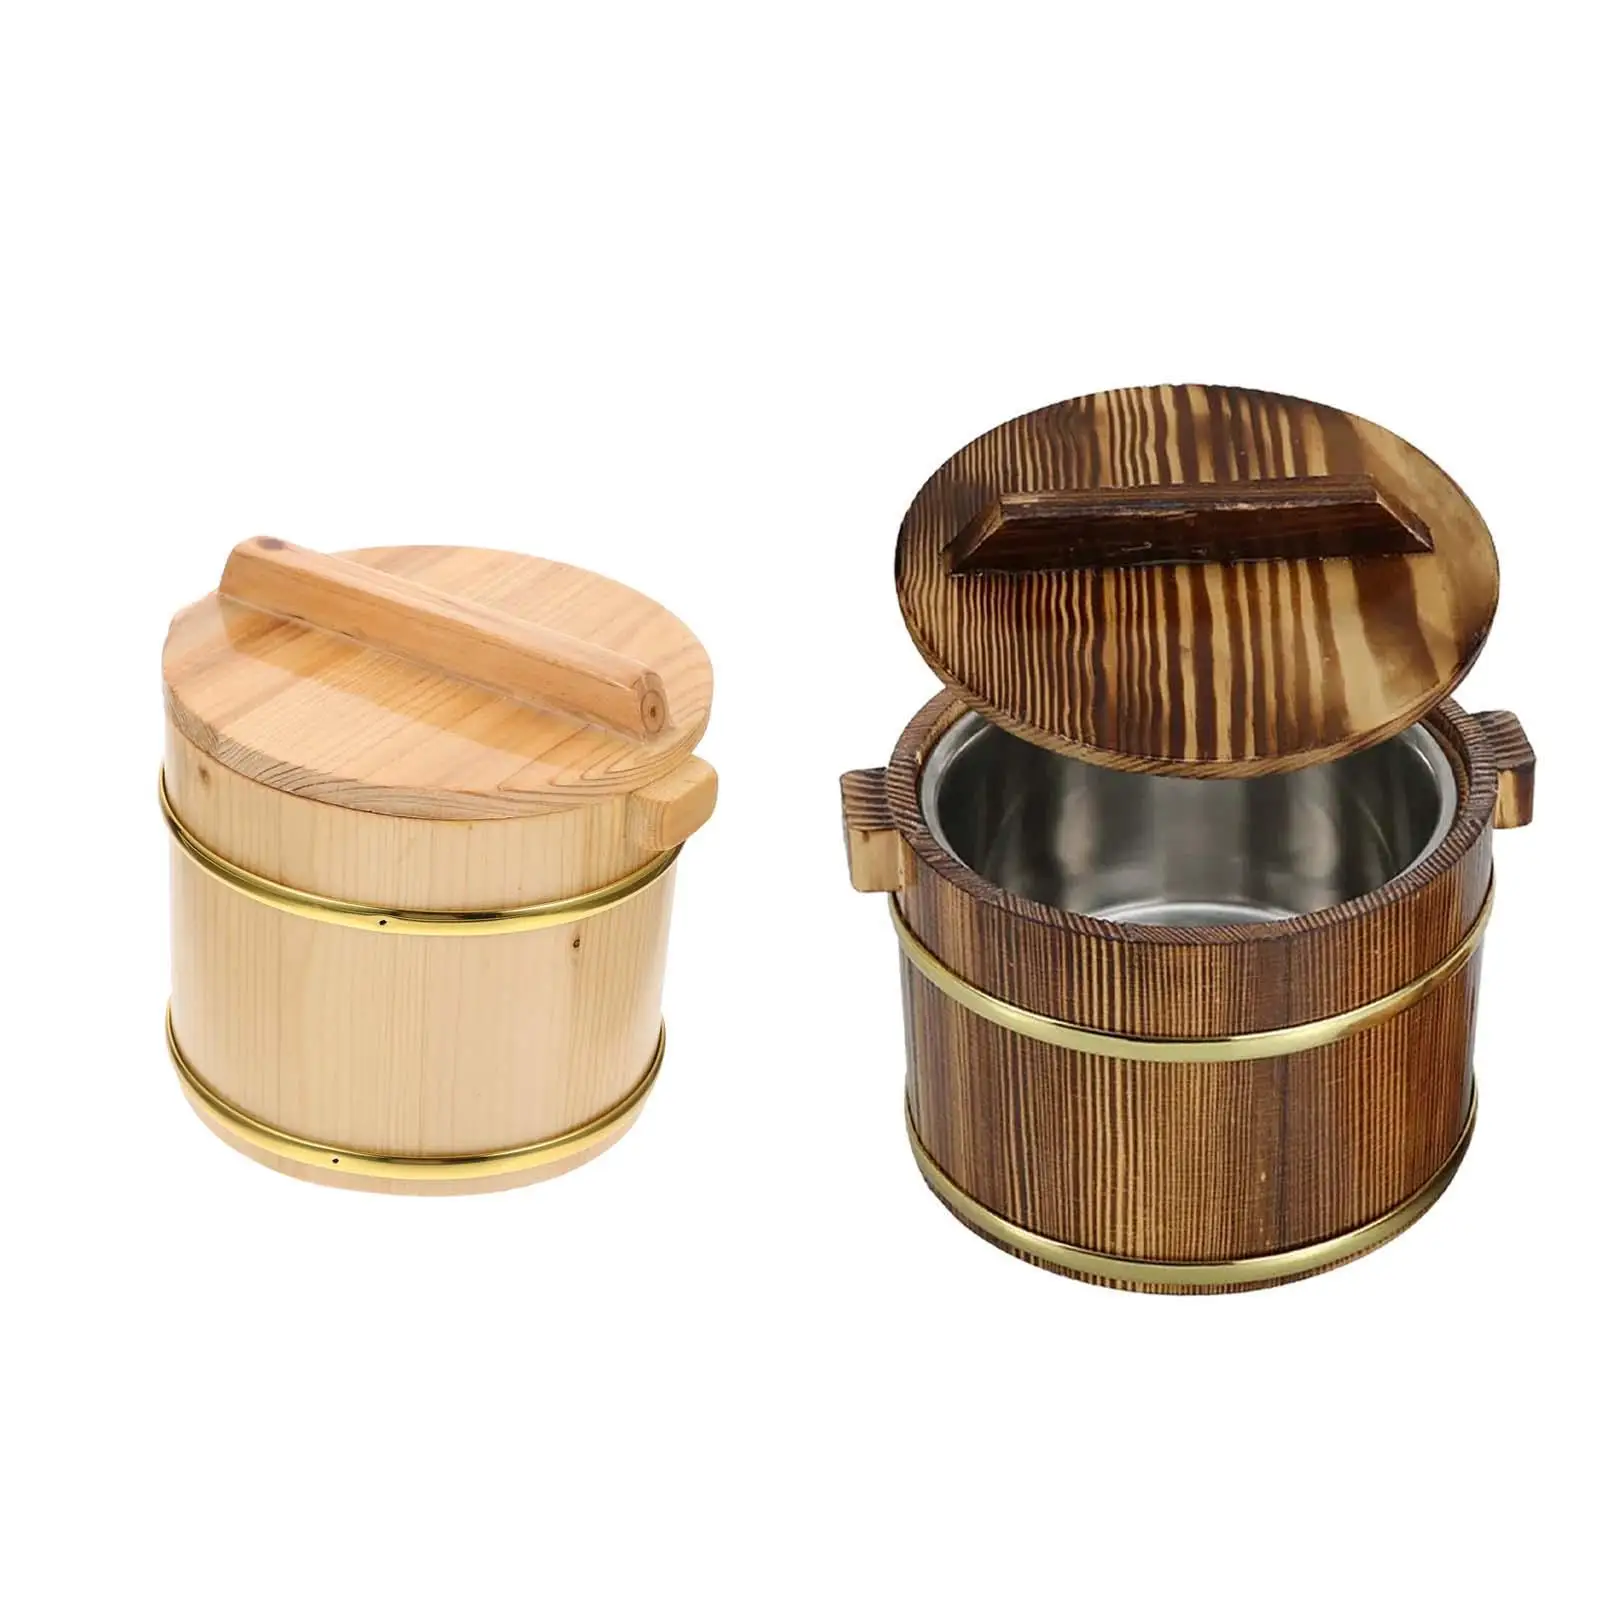 Japanese Rice Bucket Reusable Practical 16cm Rice Mixing Tub with Lid Rice Steamed Cask for Kitchen Cooking Restaurant